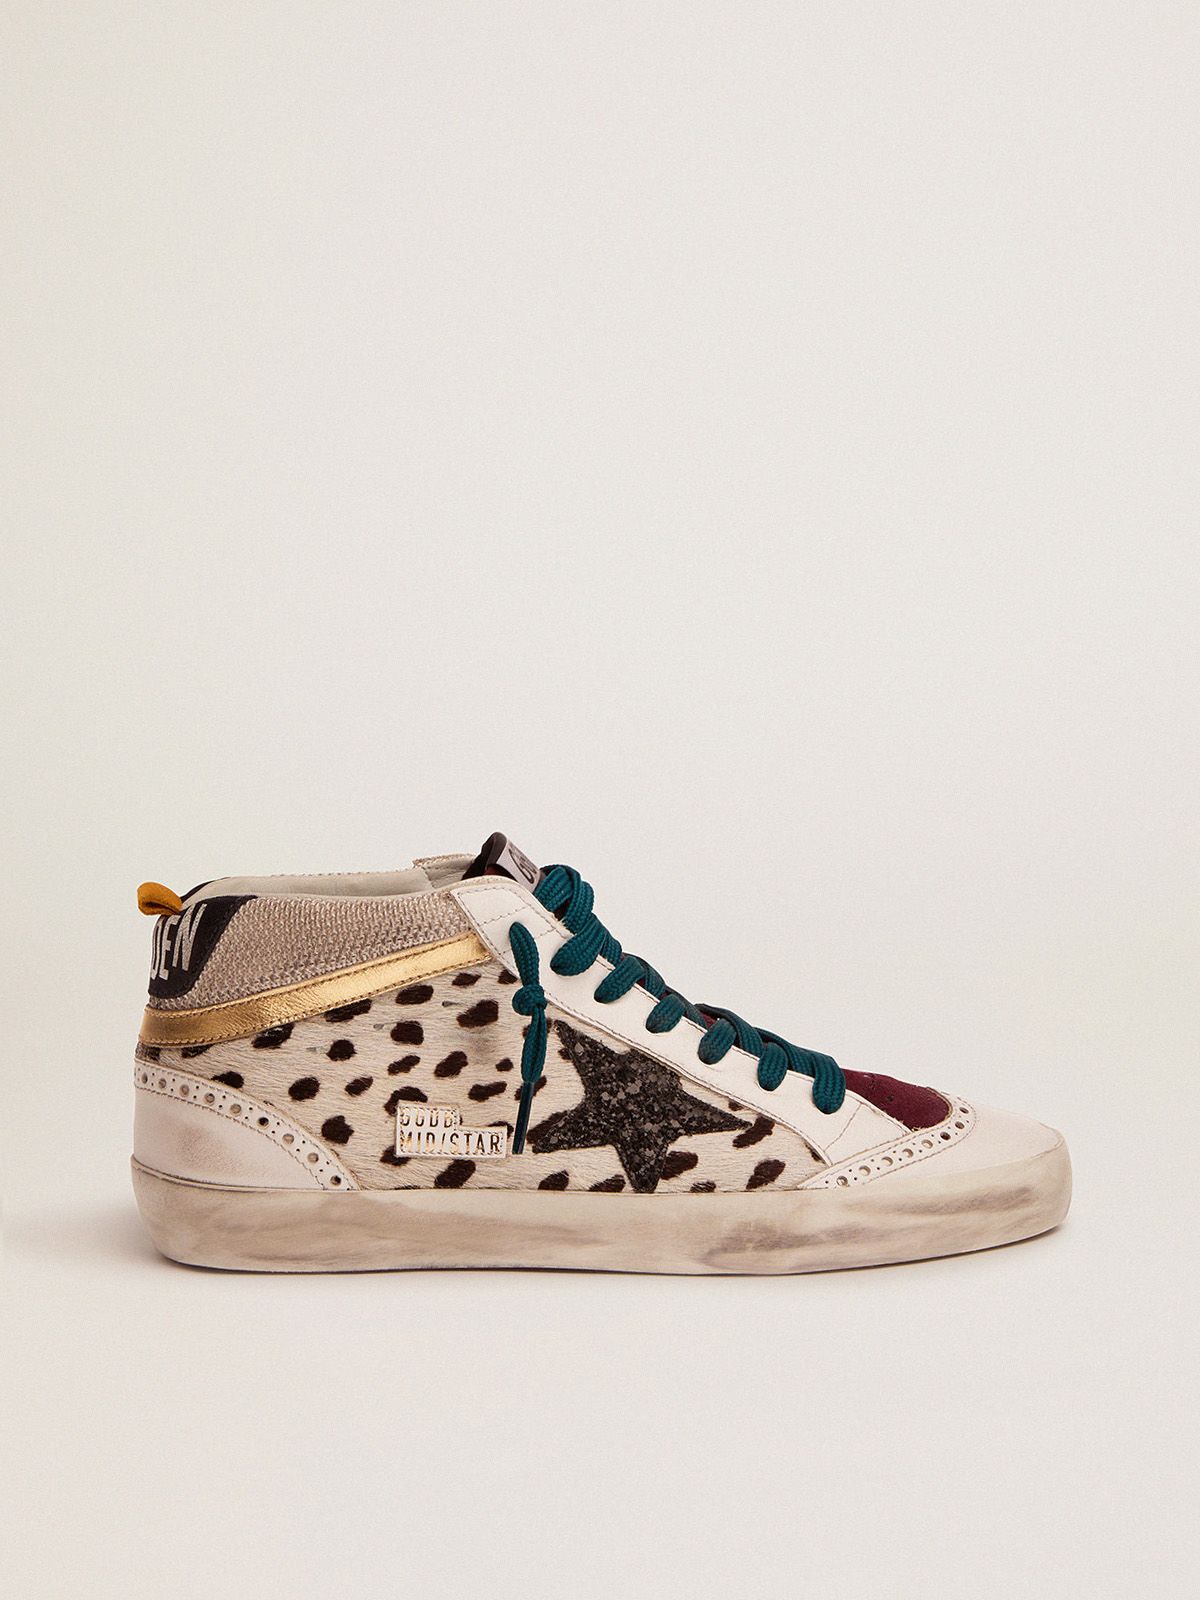 golden goose Star glitter upper and black skin animal-print pony star Mid sneakers with